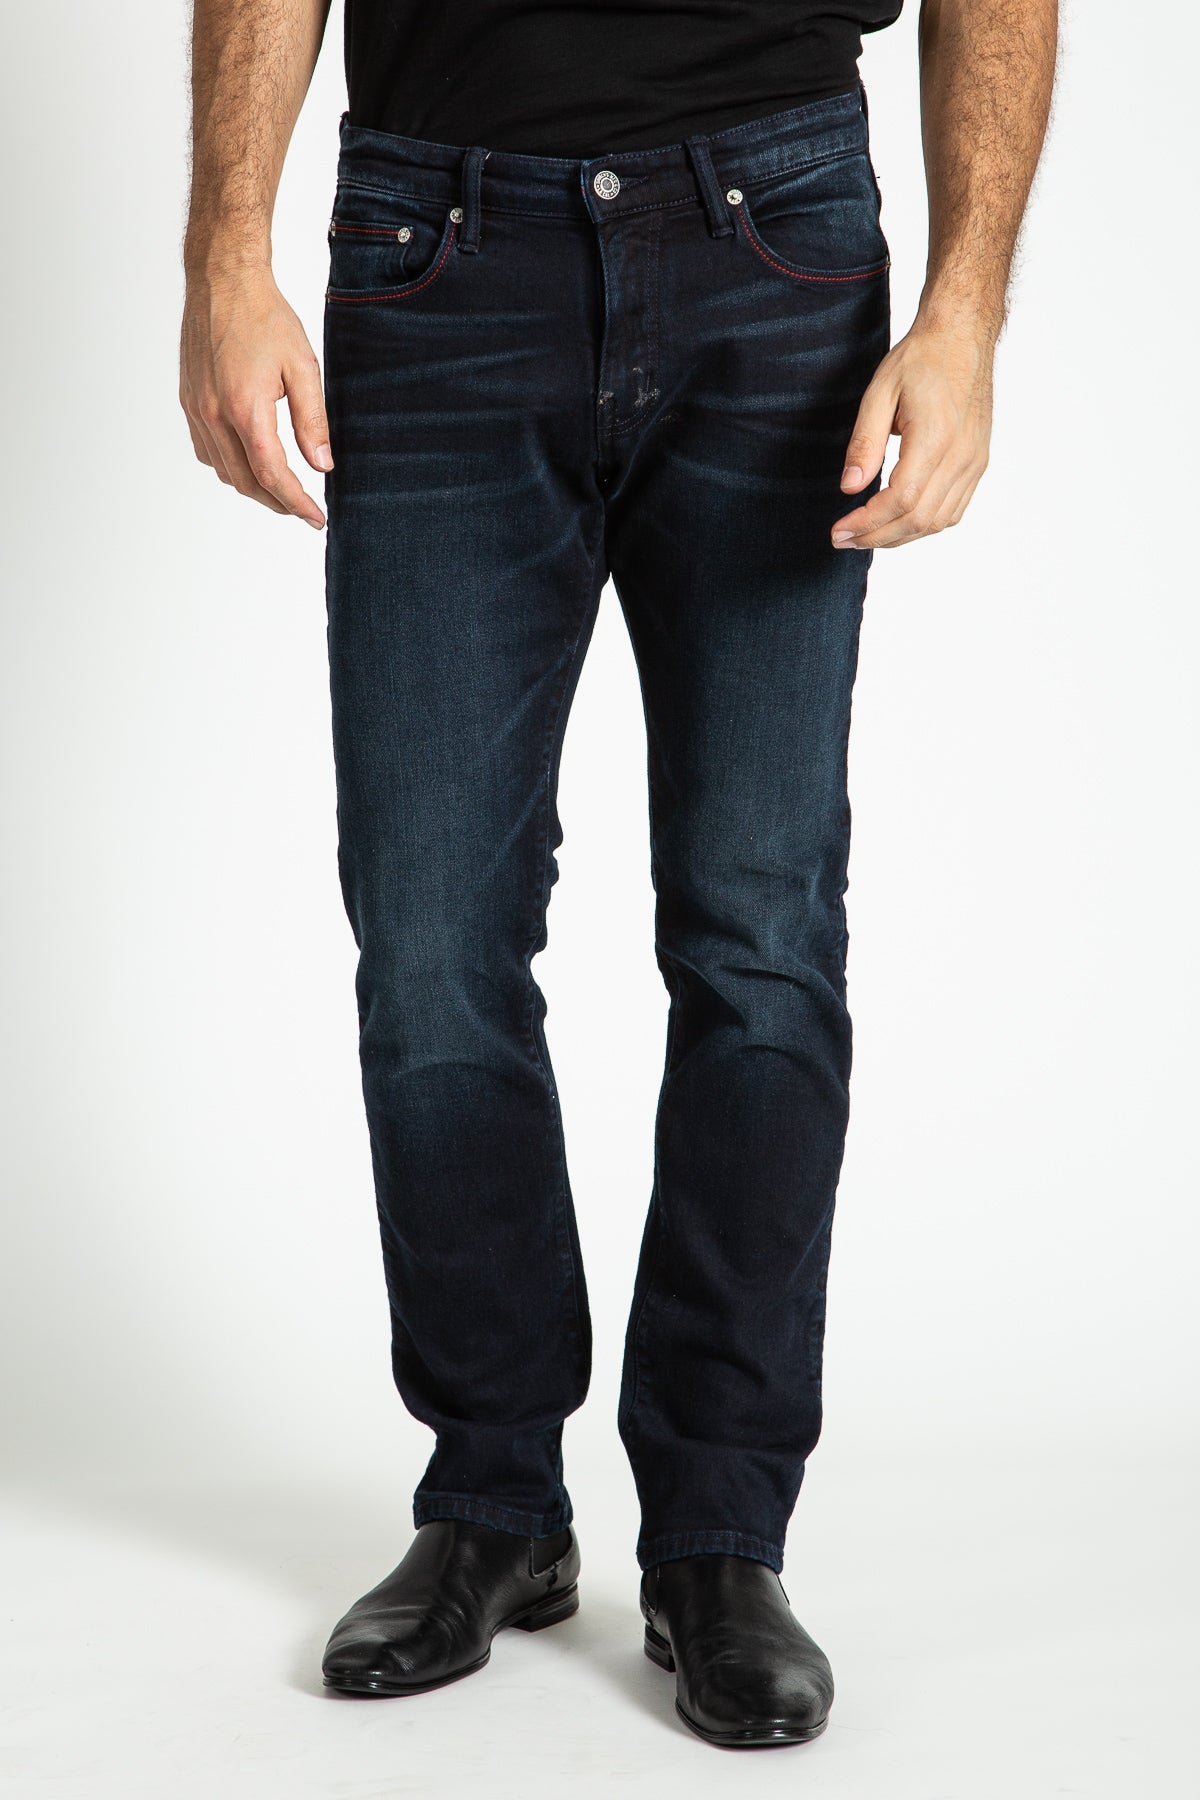 BARFLY SLIM JEANS IN TACOMA – Stitch's Jeans